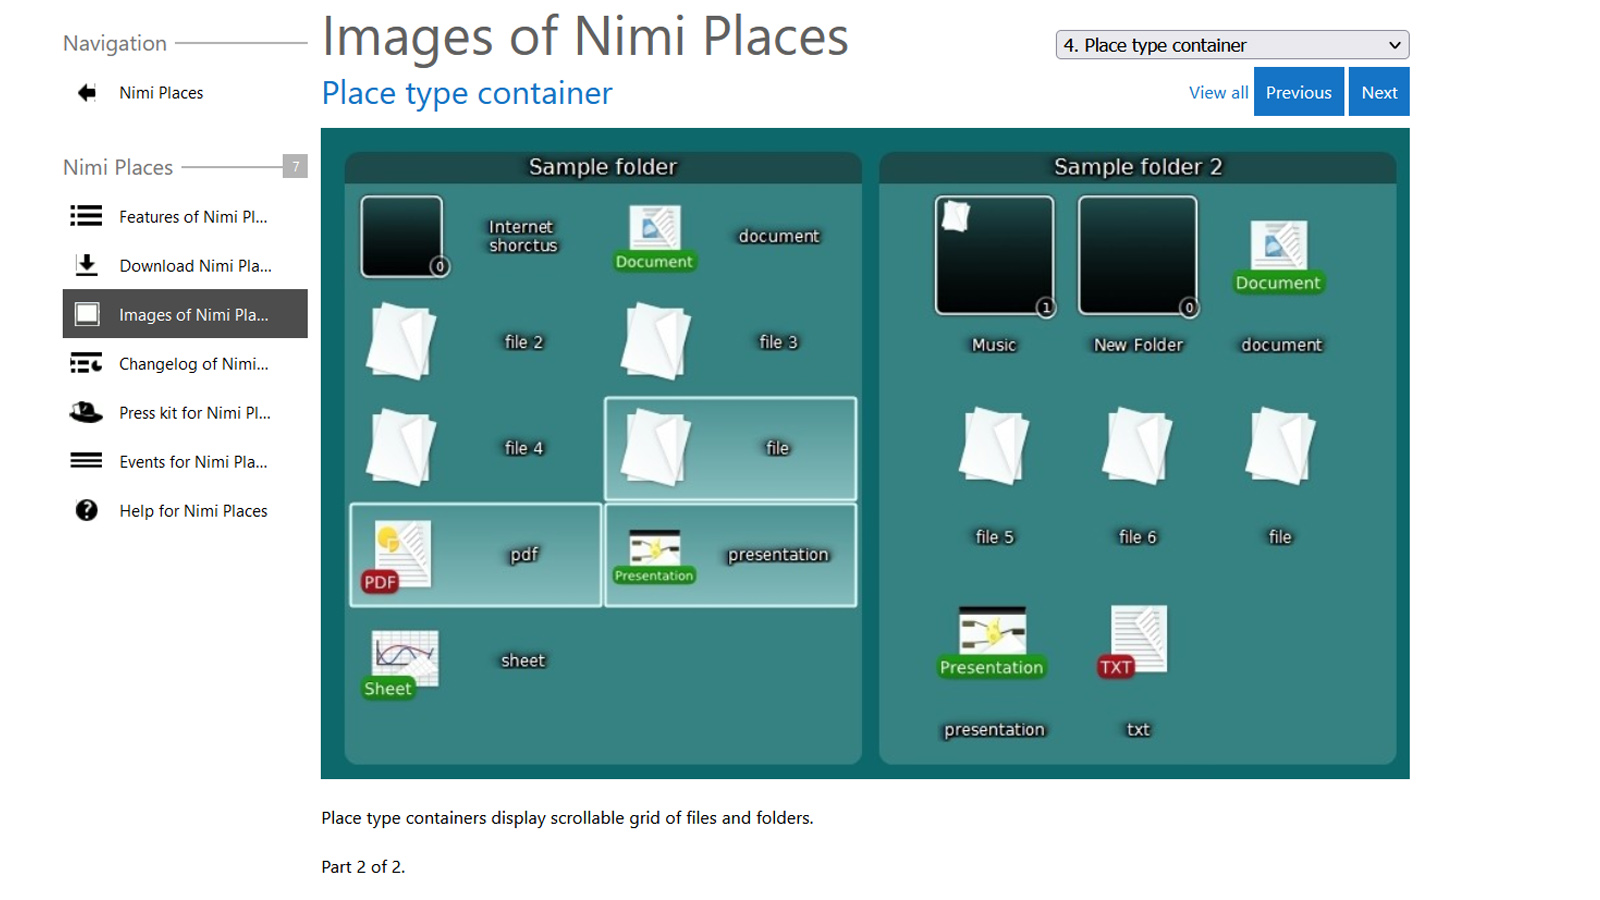 Find pricing, reviews and other details about Nimi Places